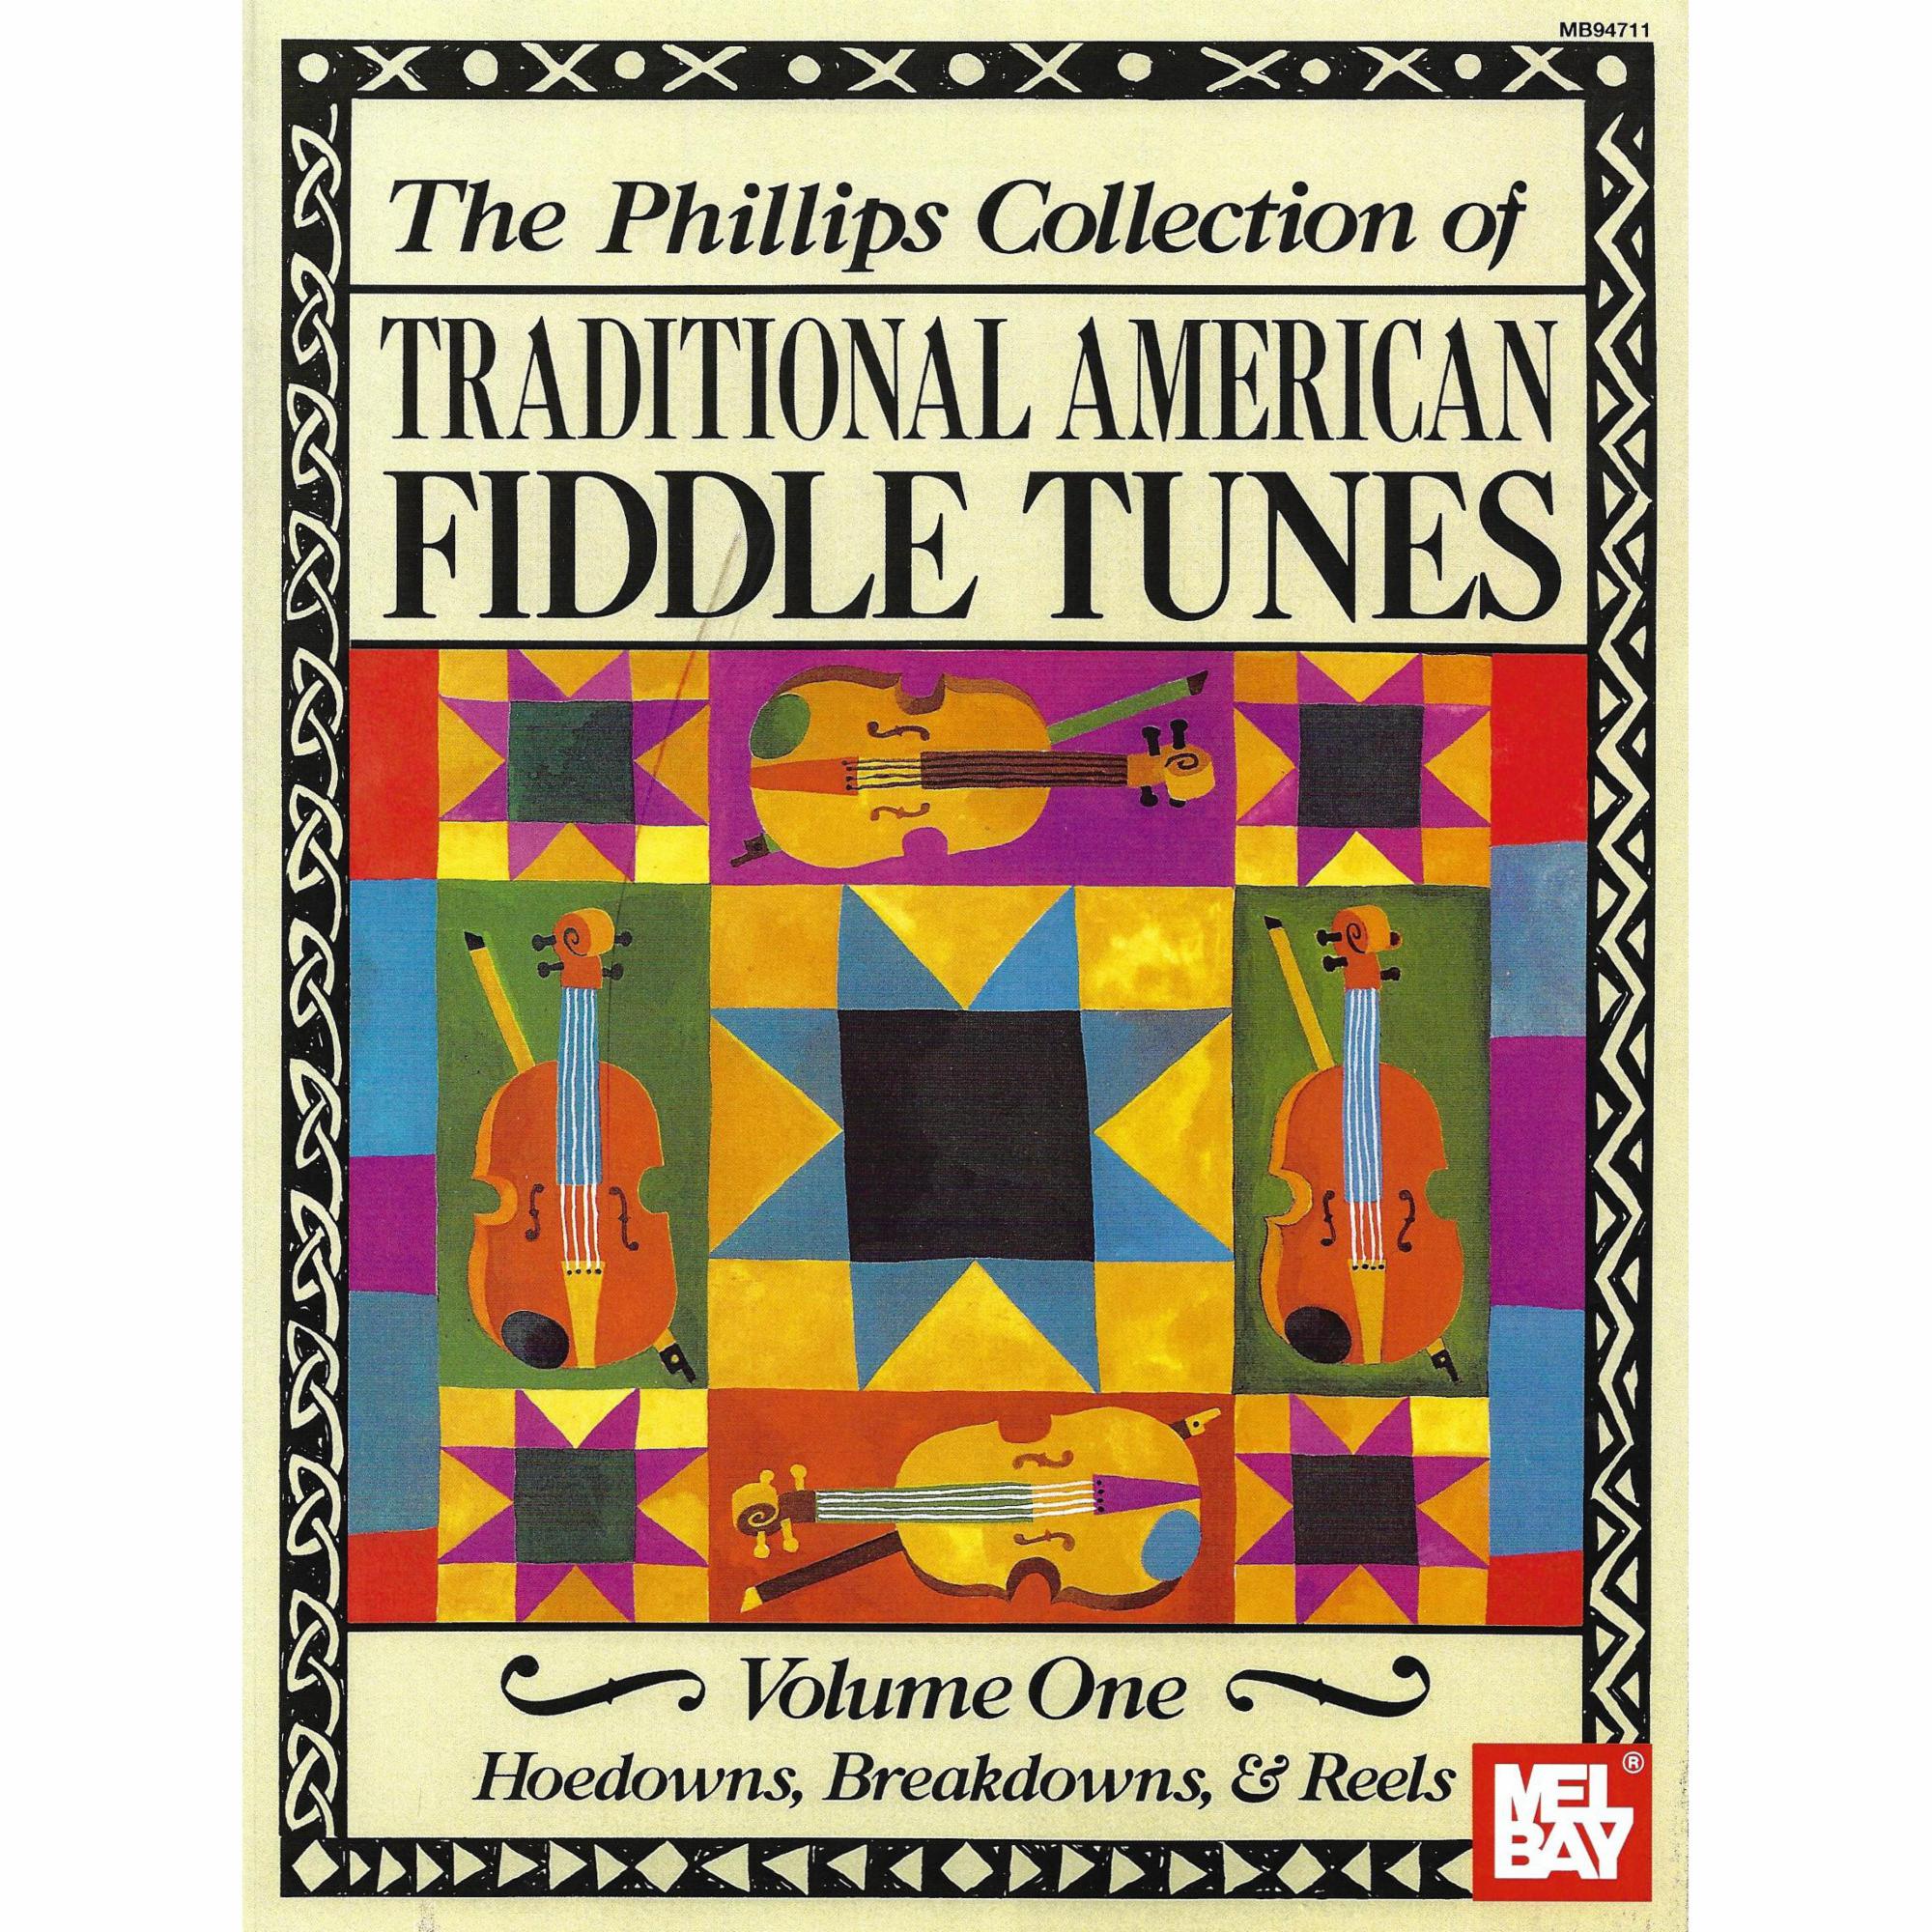 The Phillips Collection of Traditional American Fiddle Tunes